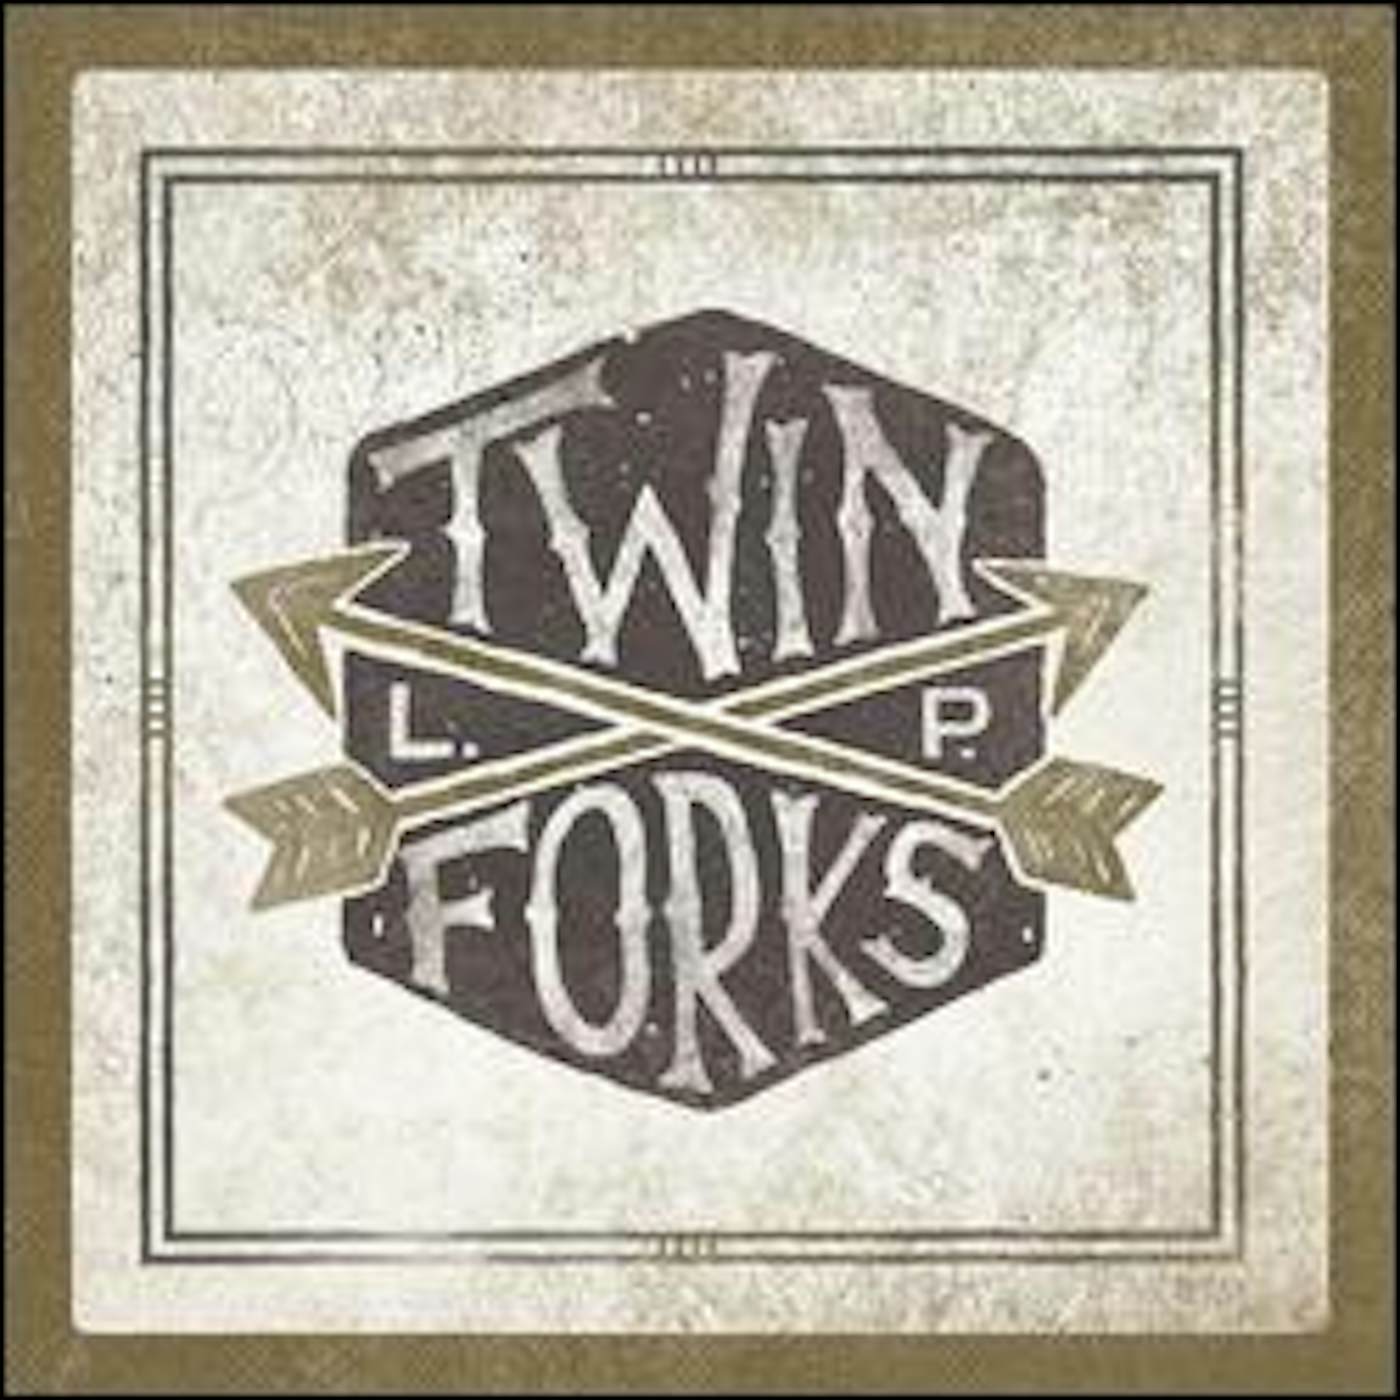 TWIN FORKS CD